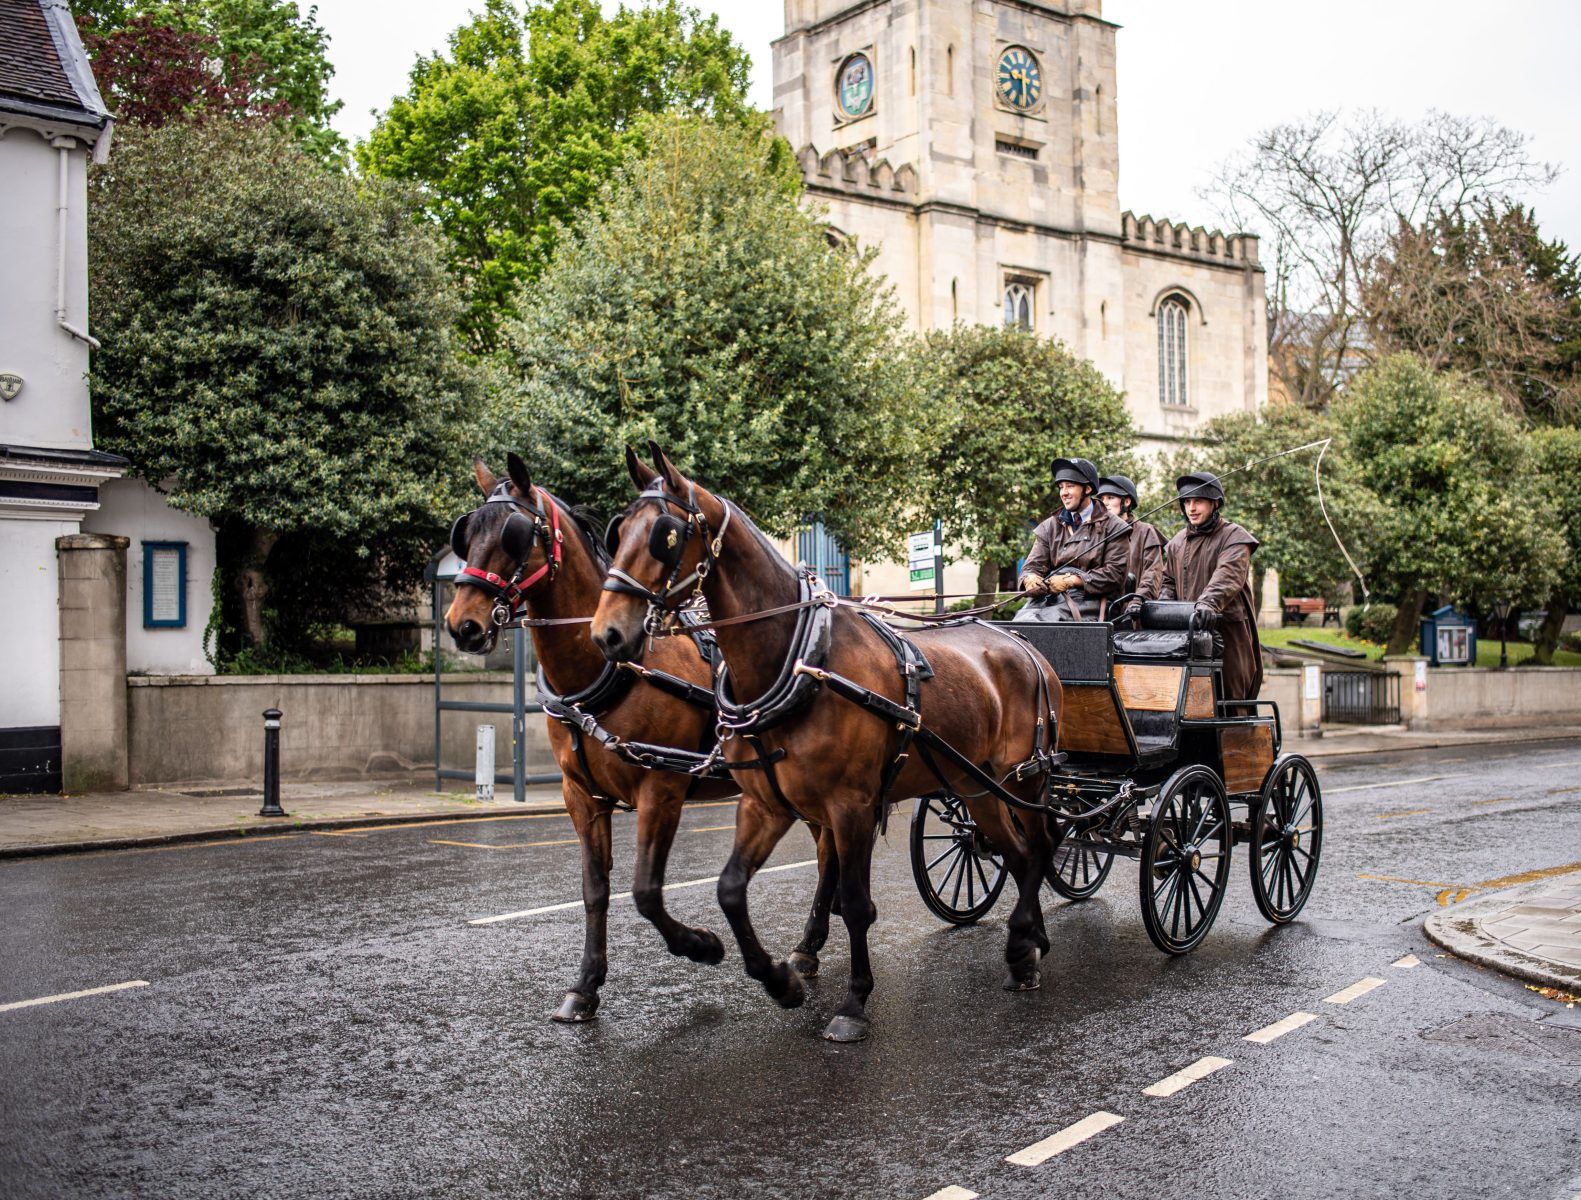 Castle Hotel Windsor horse and carriage